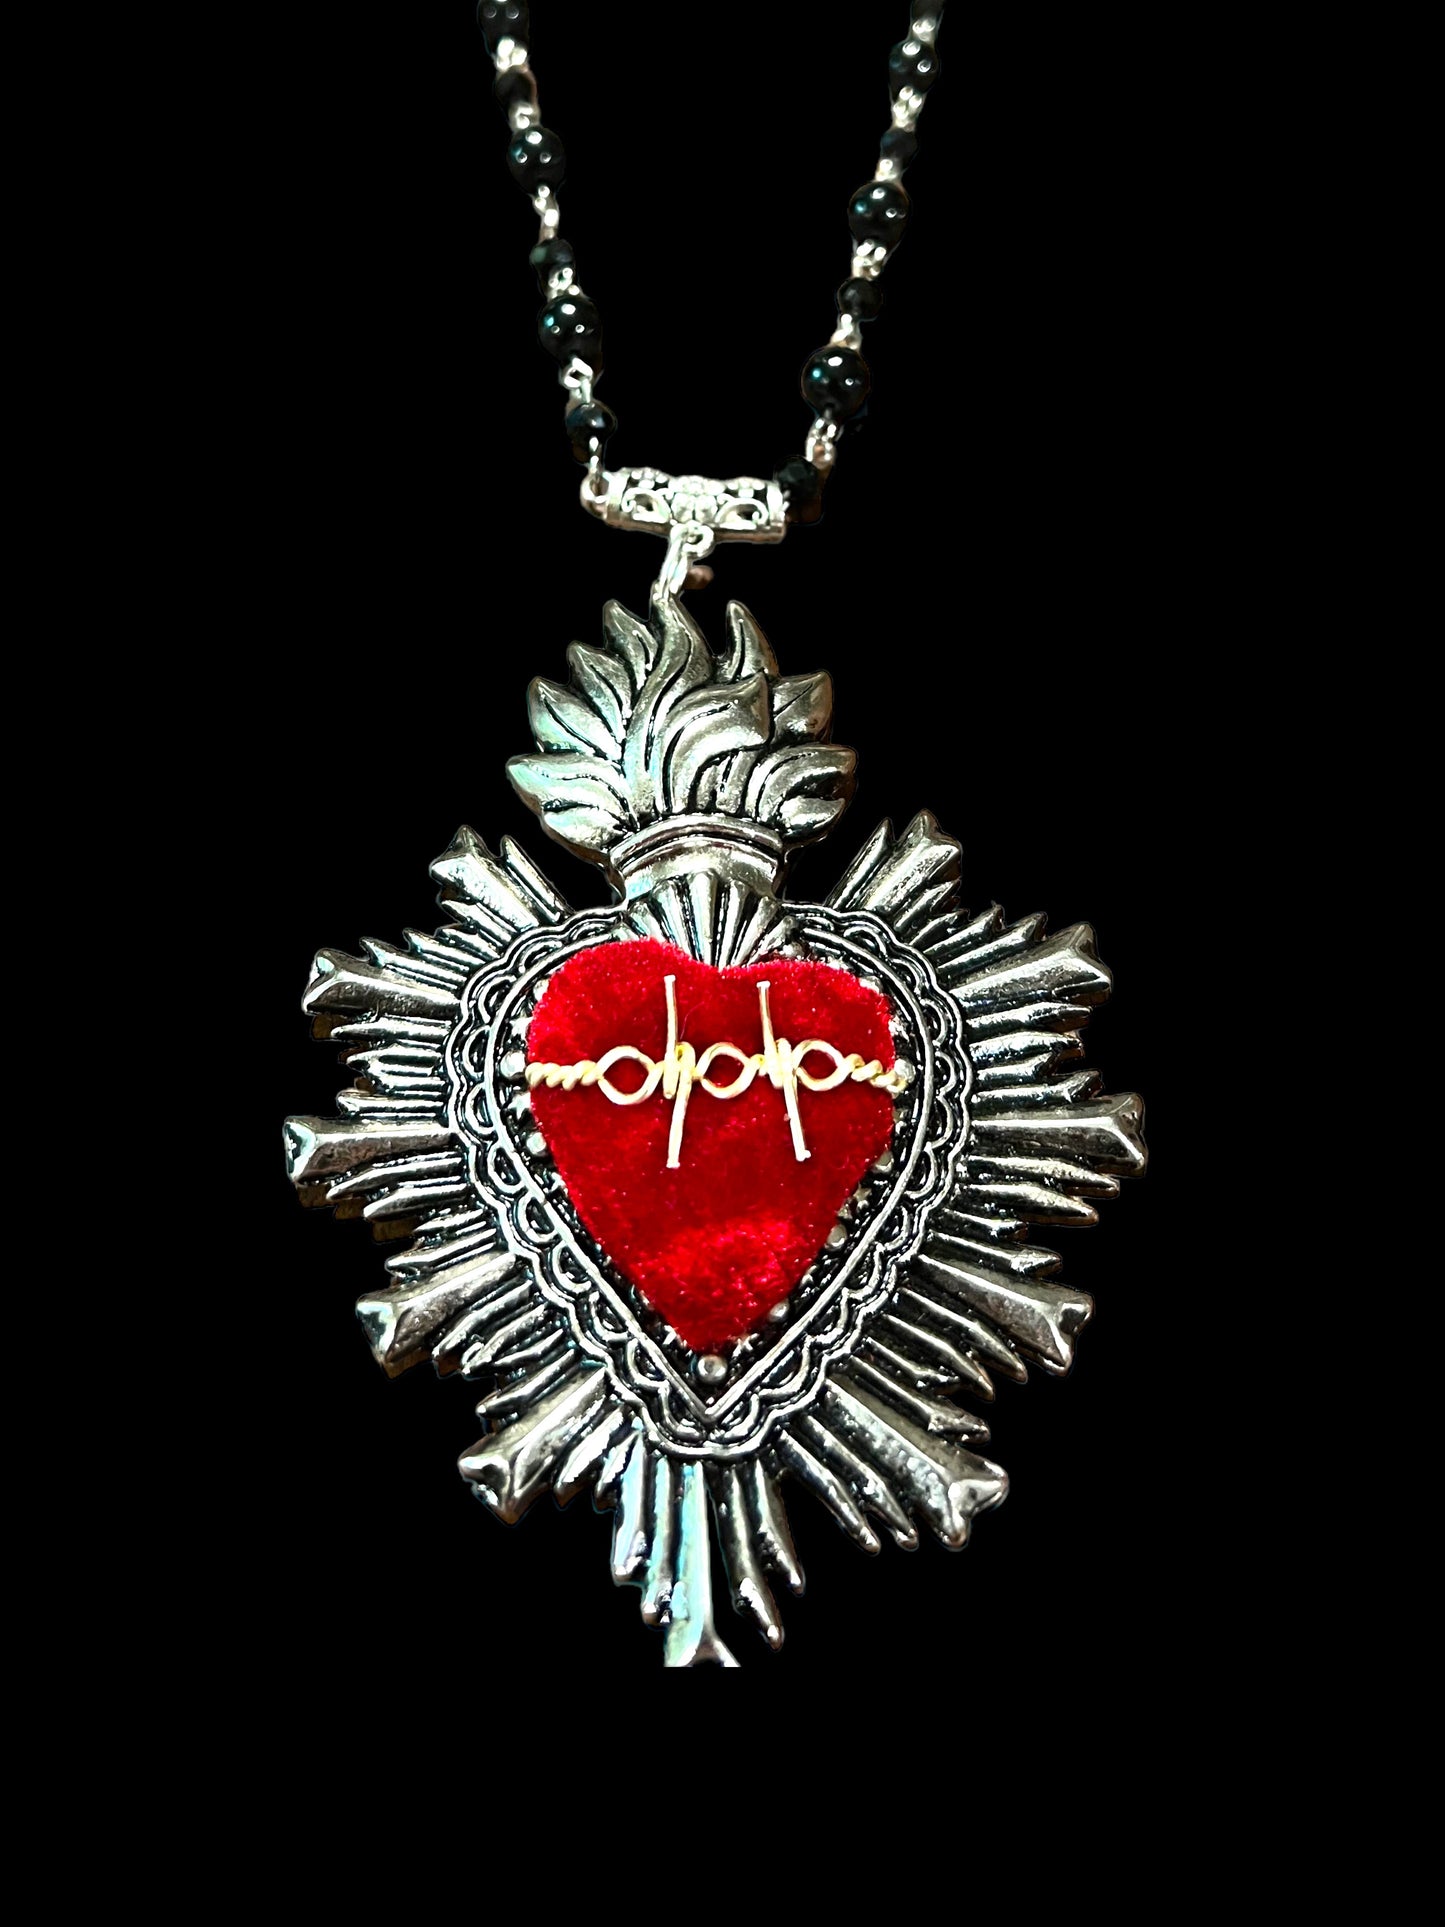 Red and silver cultural fashion necklace. the center is red and has a golden ornament, the chain is made with black and silver stones.